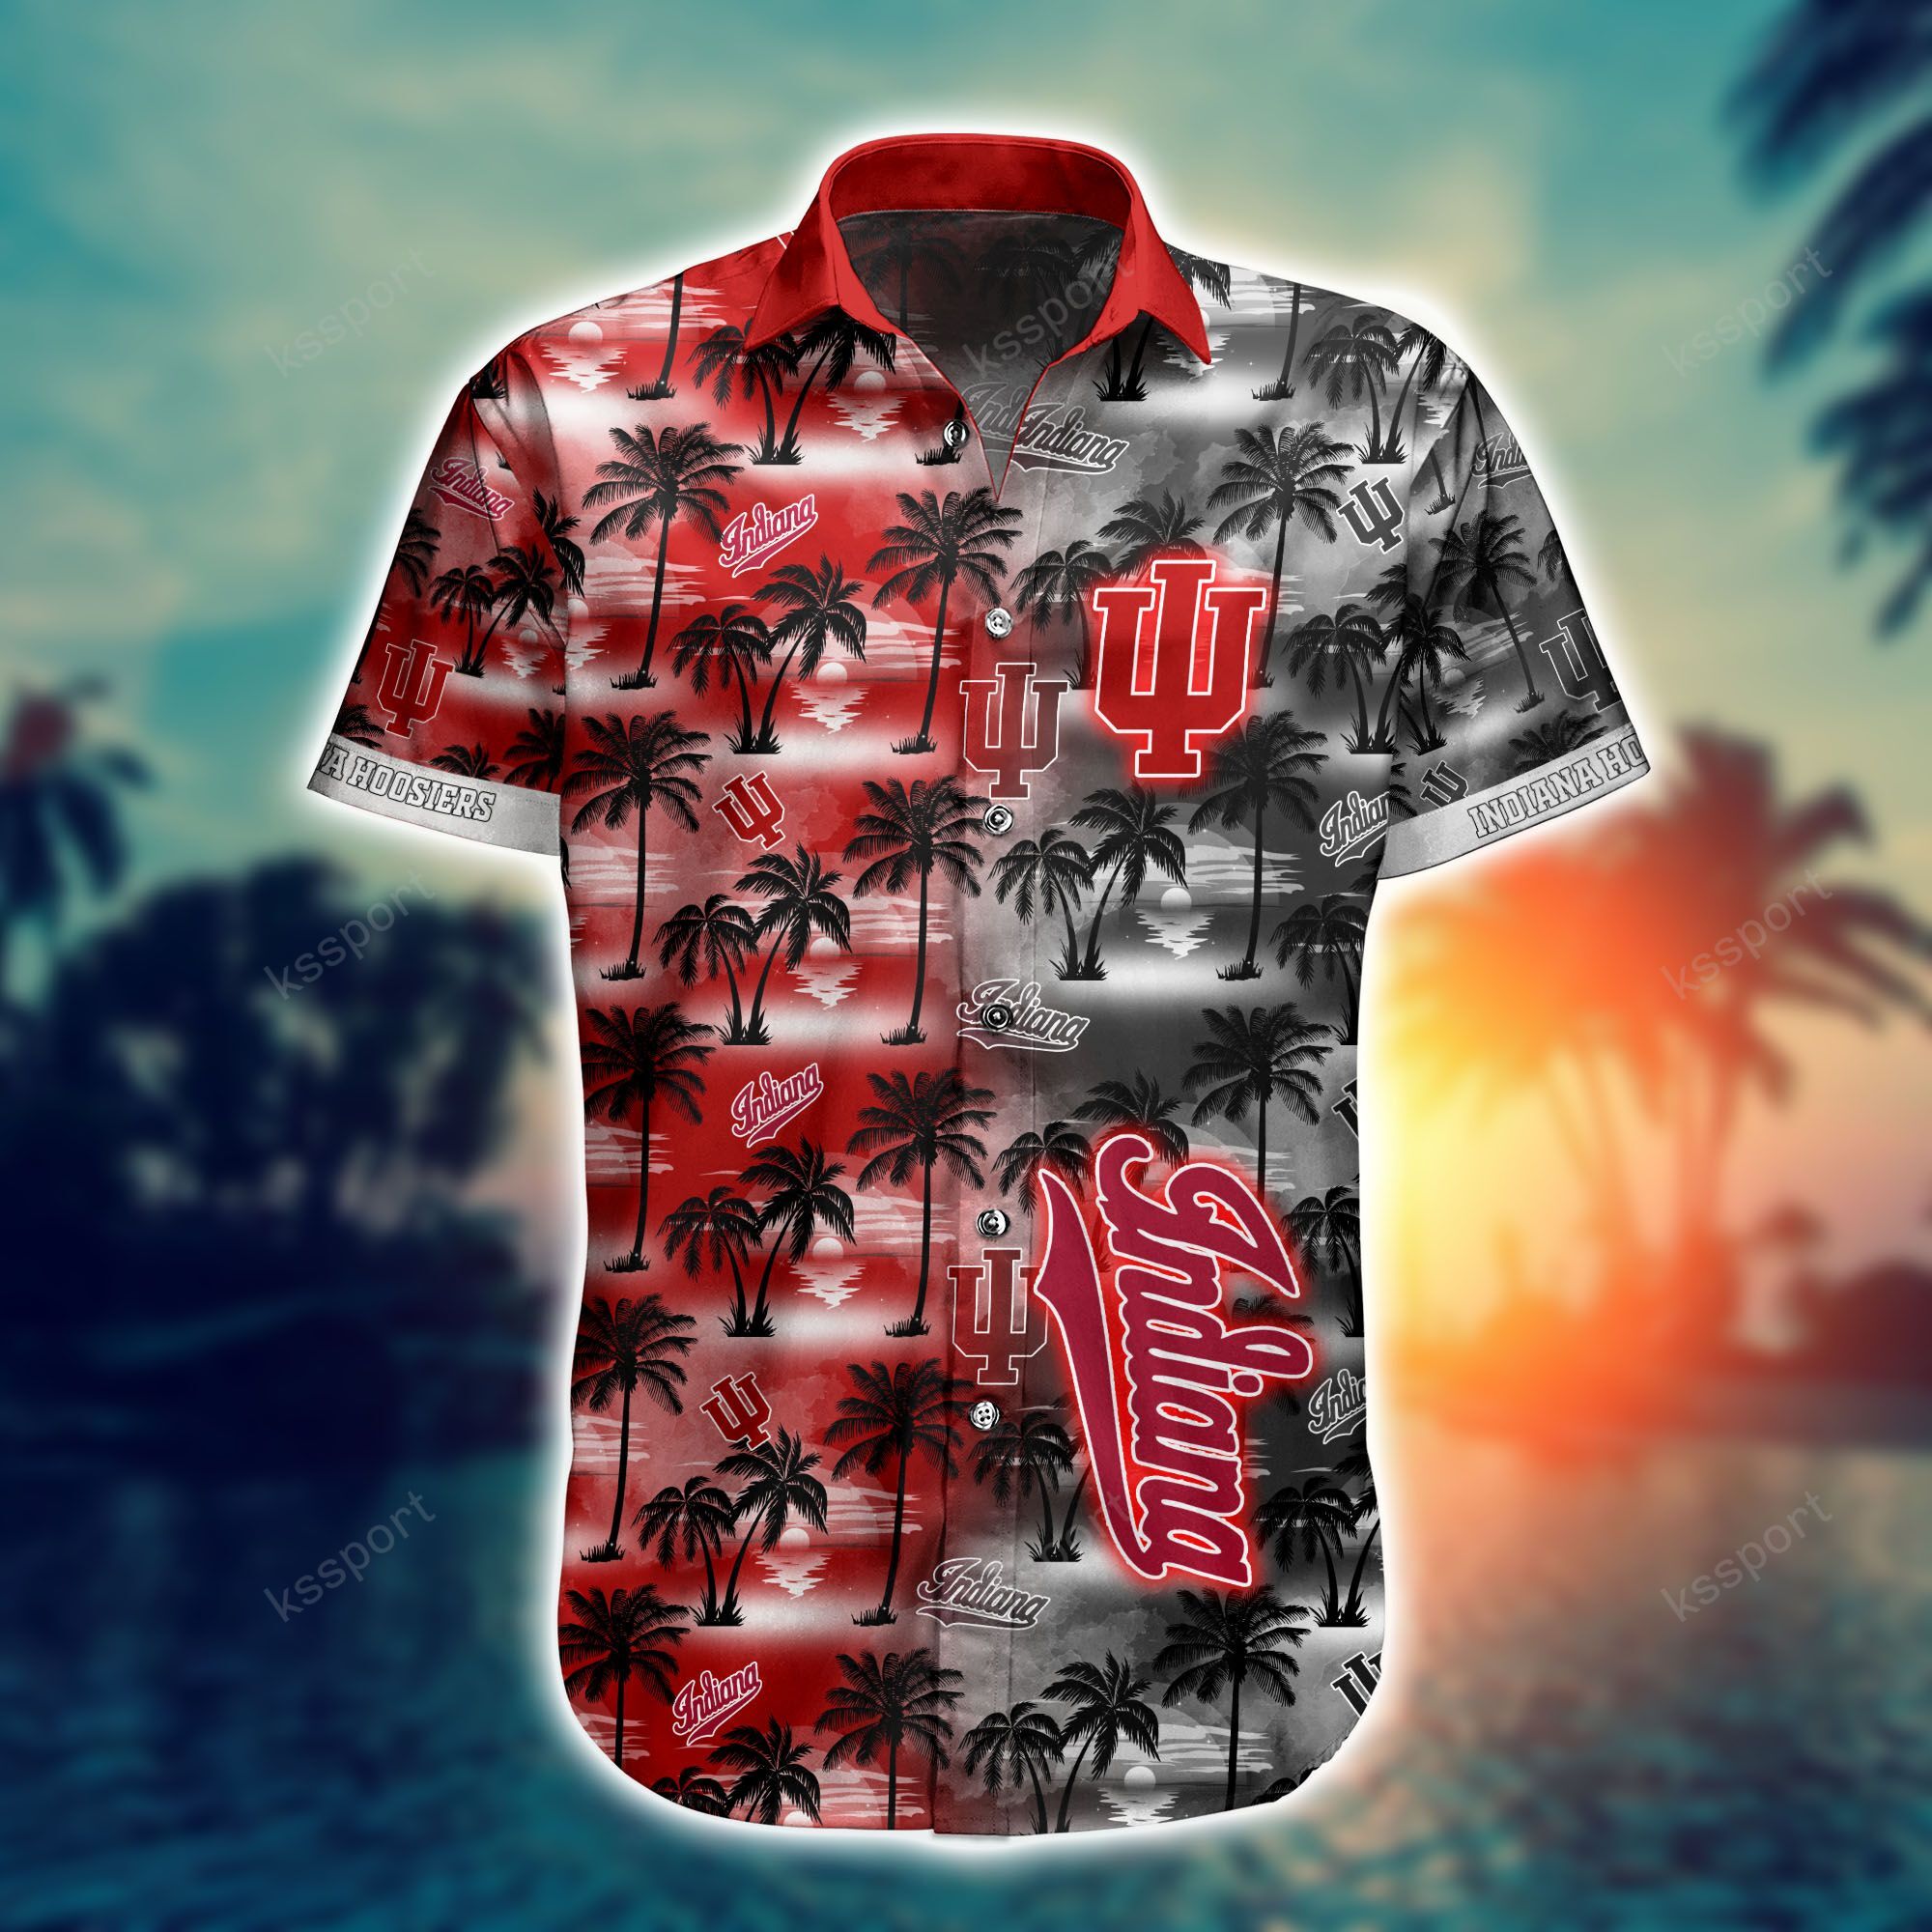 Top cool Hawaiian shirt 2022 - Make sure you get yours today before they run out! 139